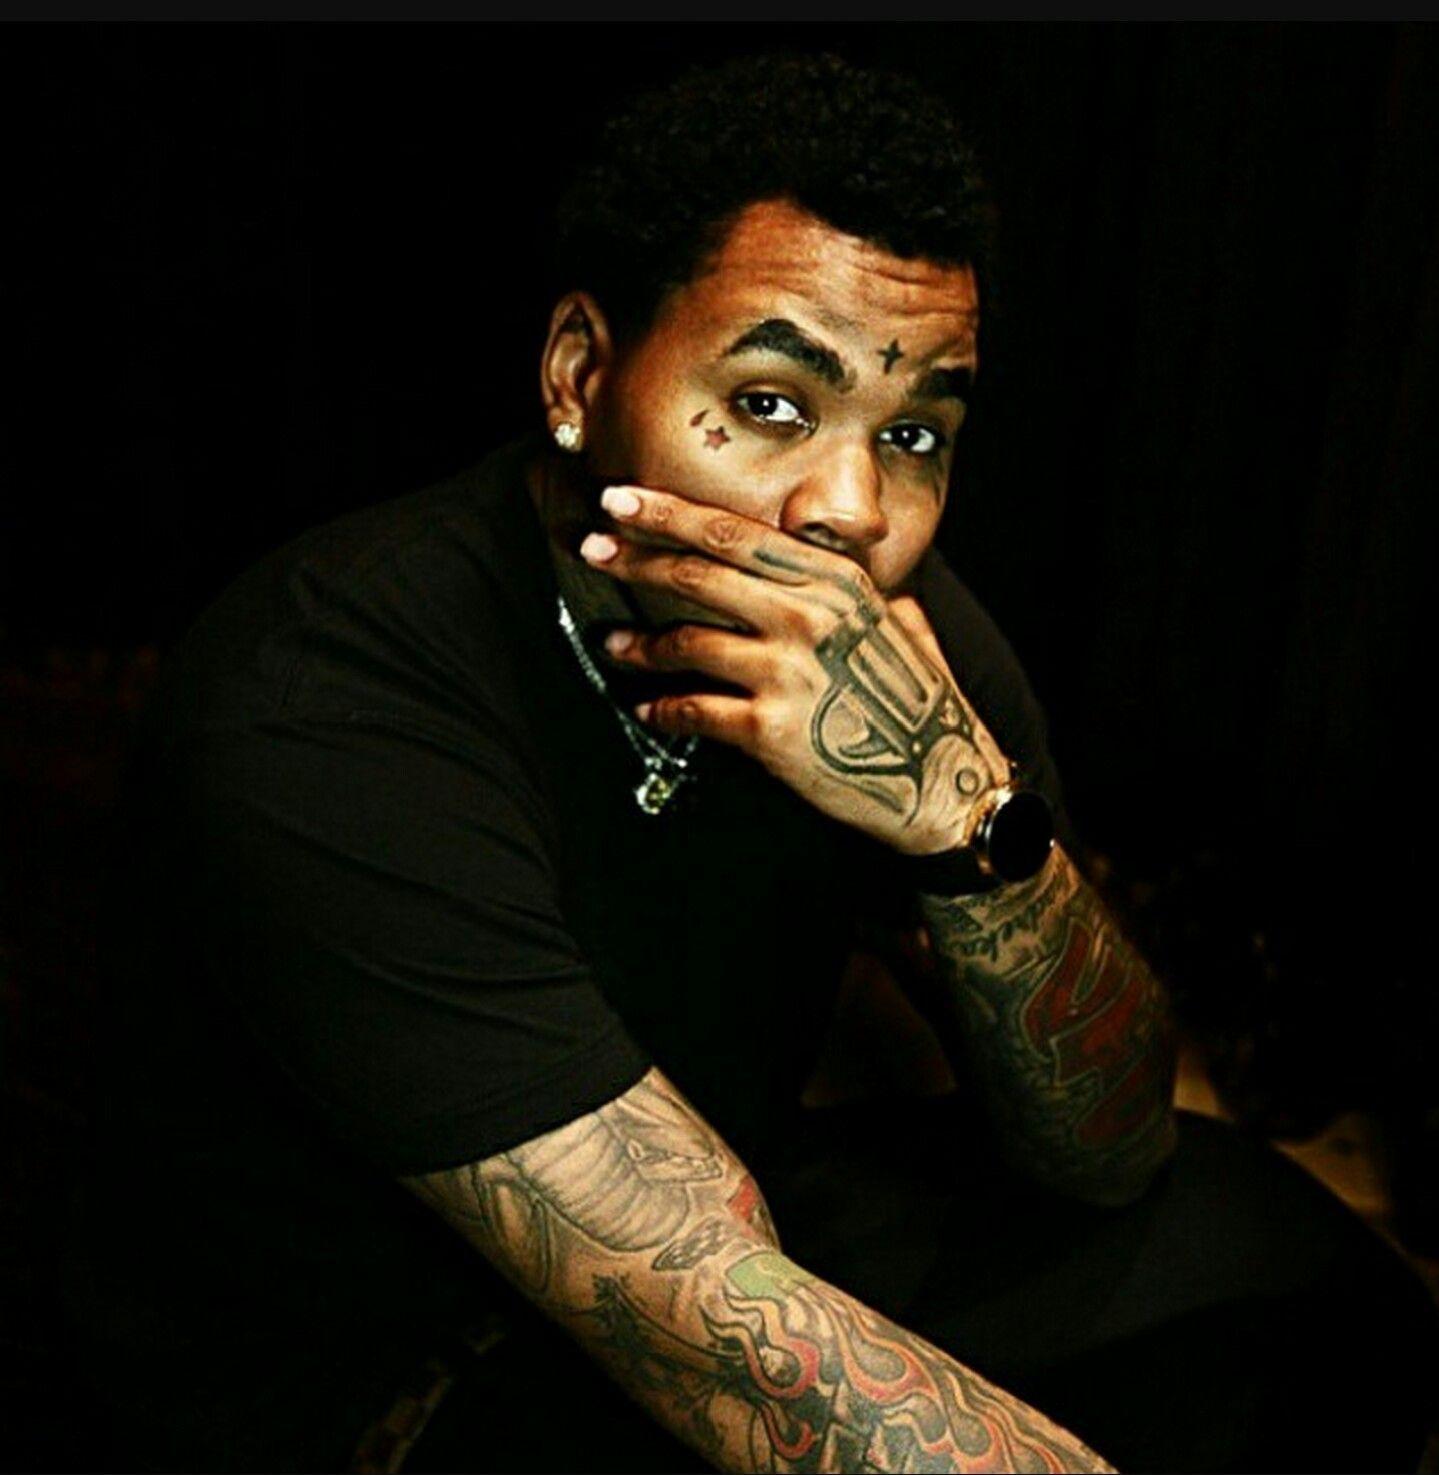 the truth kevin gates download